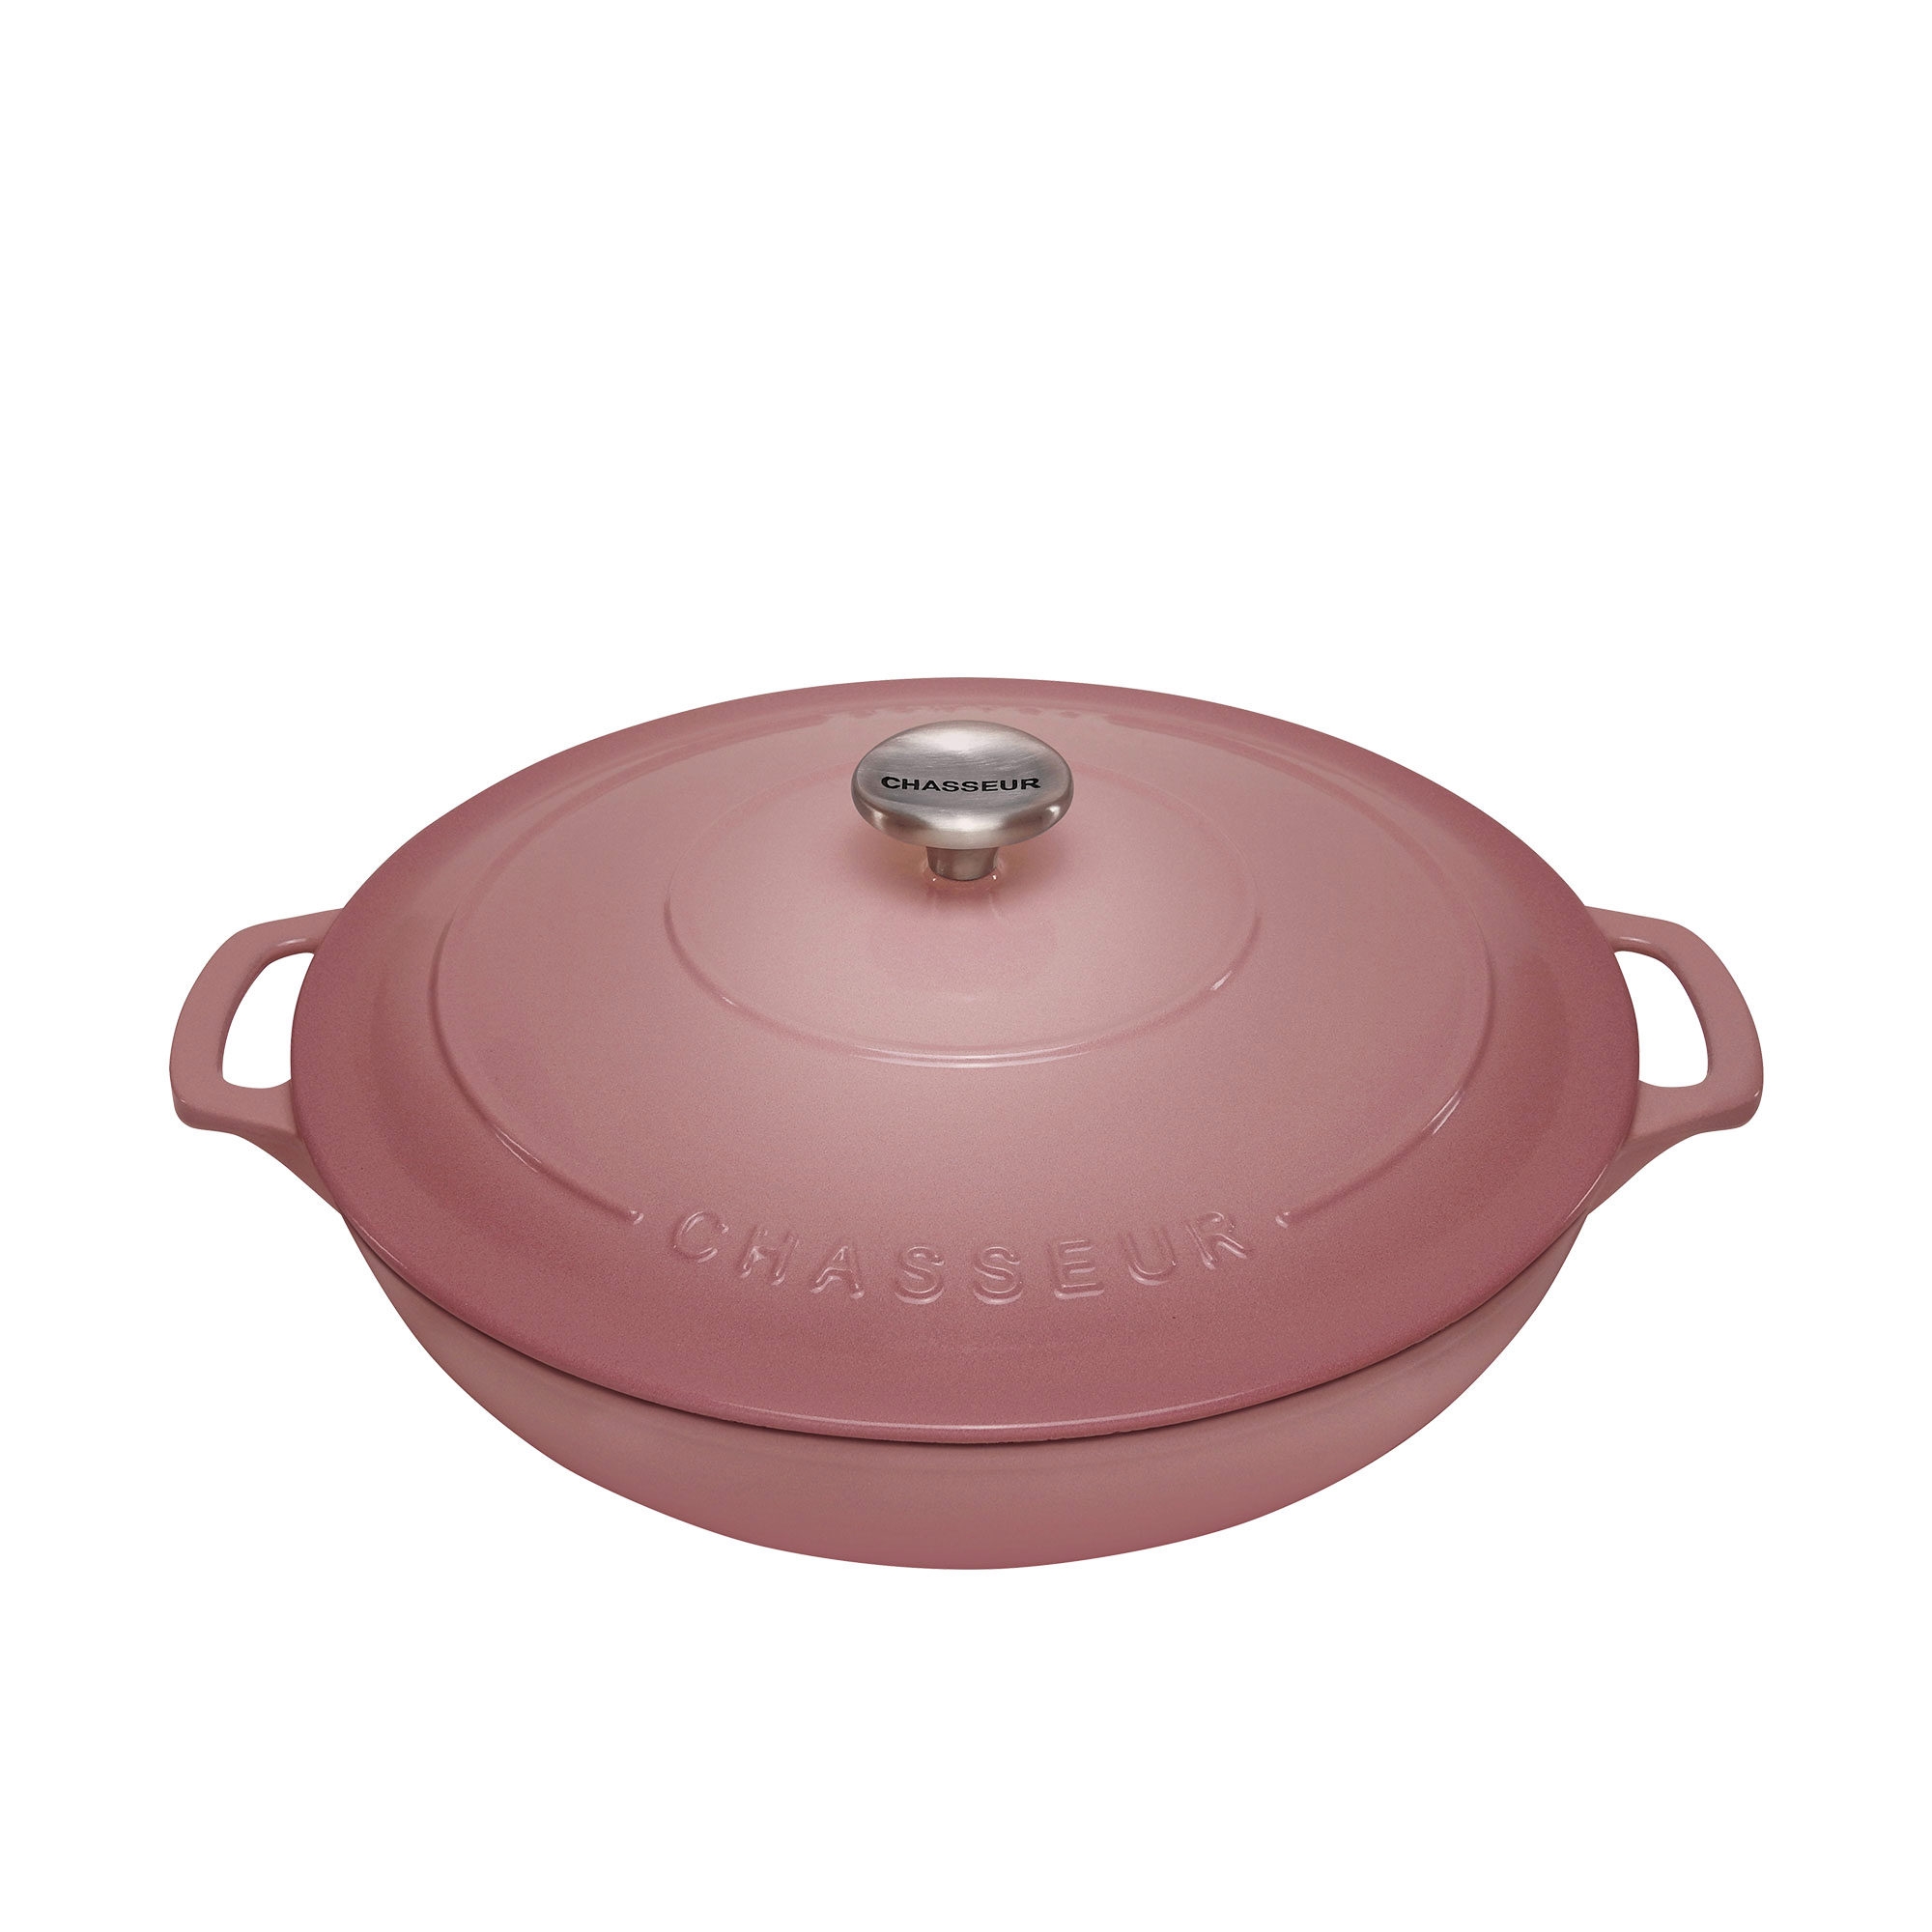 Chasseur Round Casserole 30cm - 2.5L Rosewood Image 1